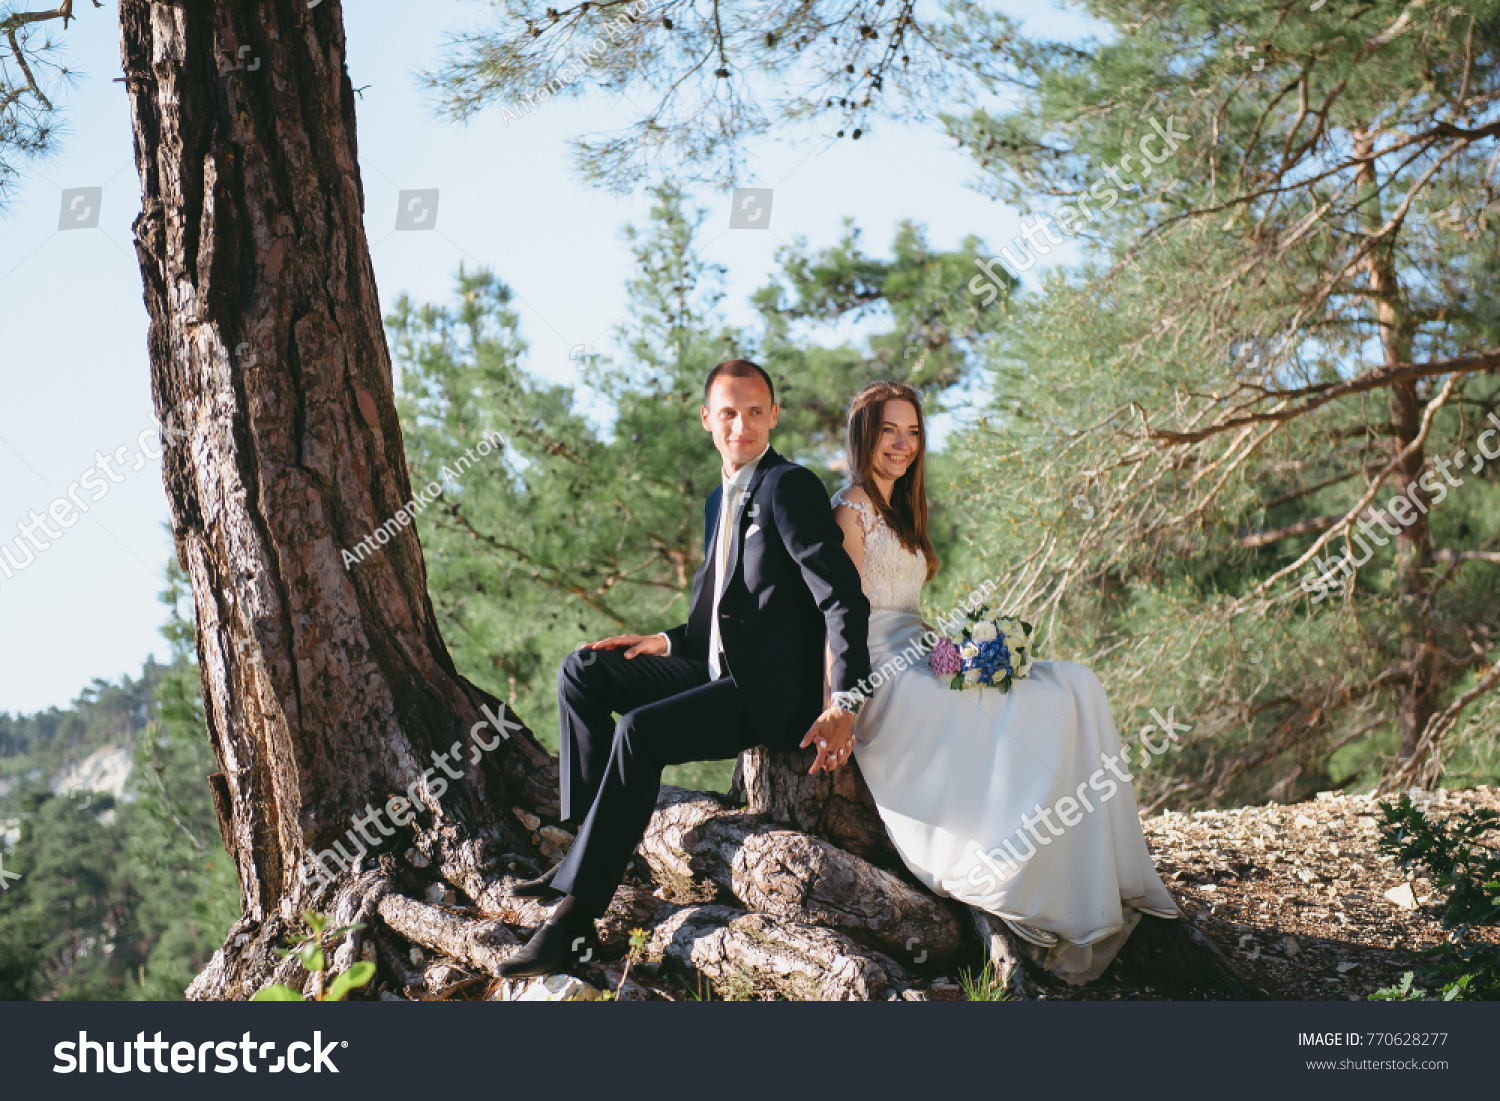 Beautiful young couple honeymooning in the forest hugging and holding hands. The enamored married girl hugs her husband. #770628277